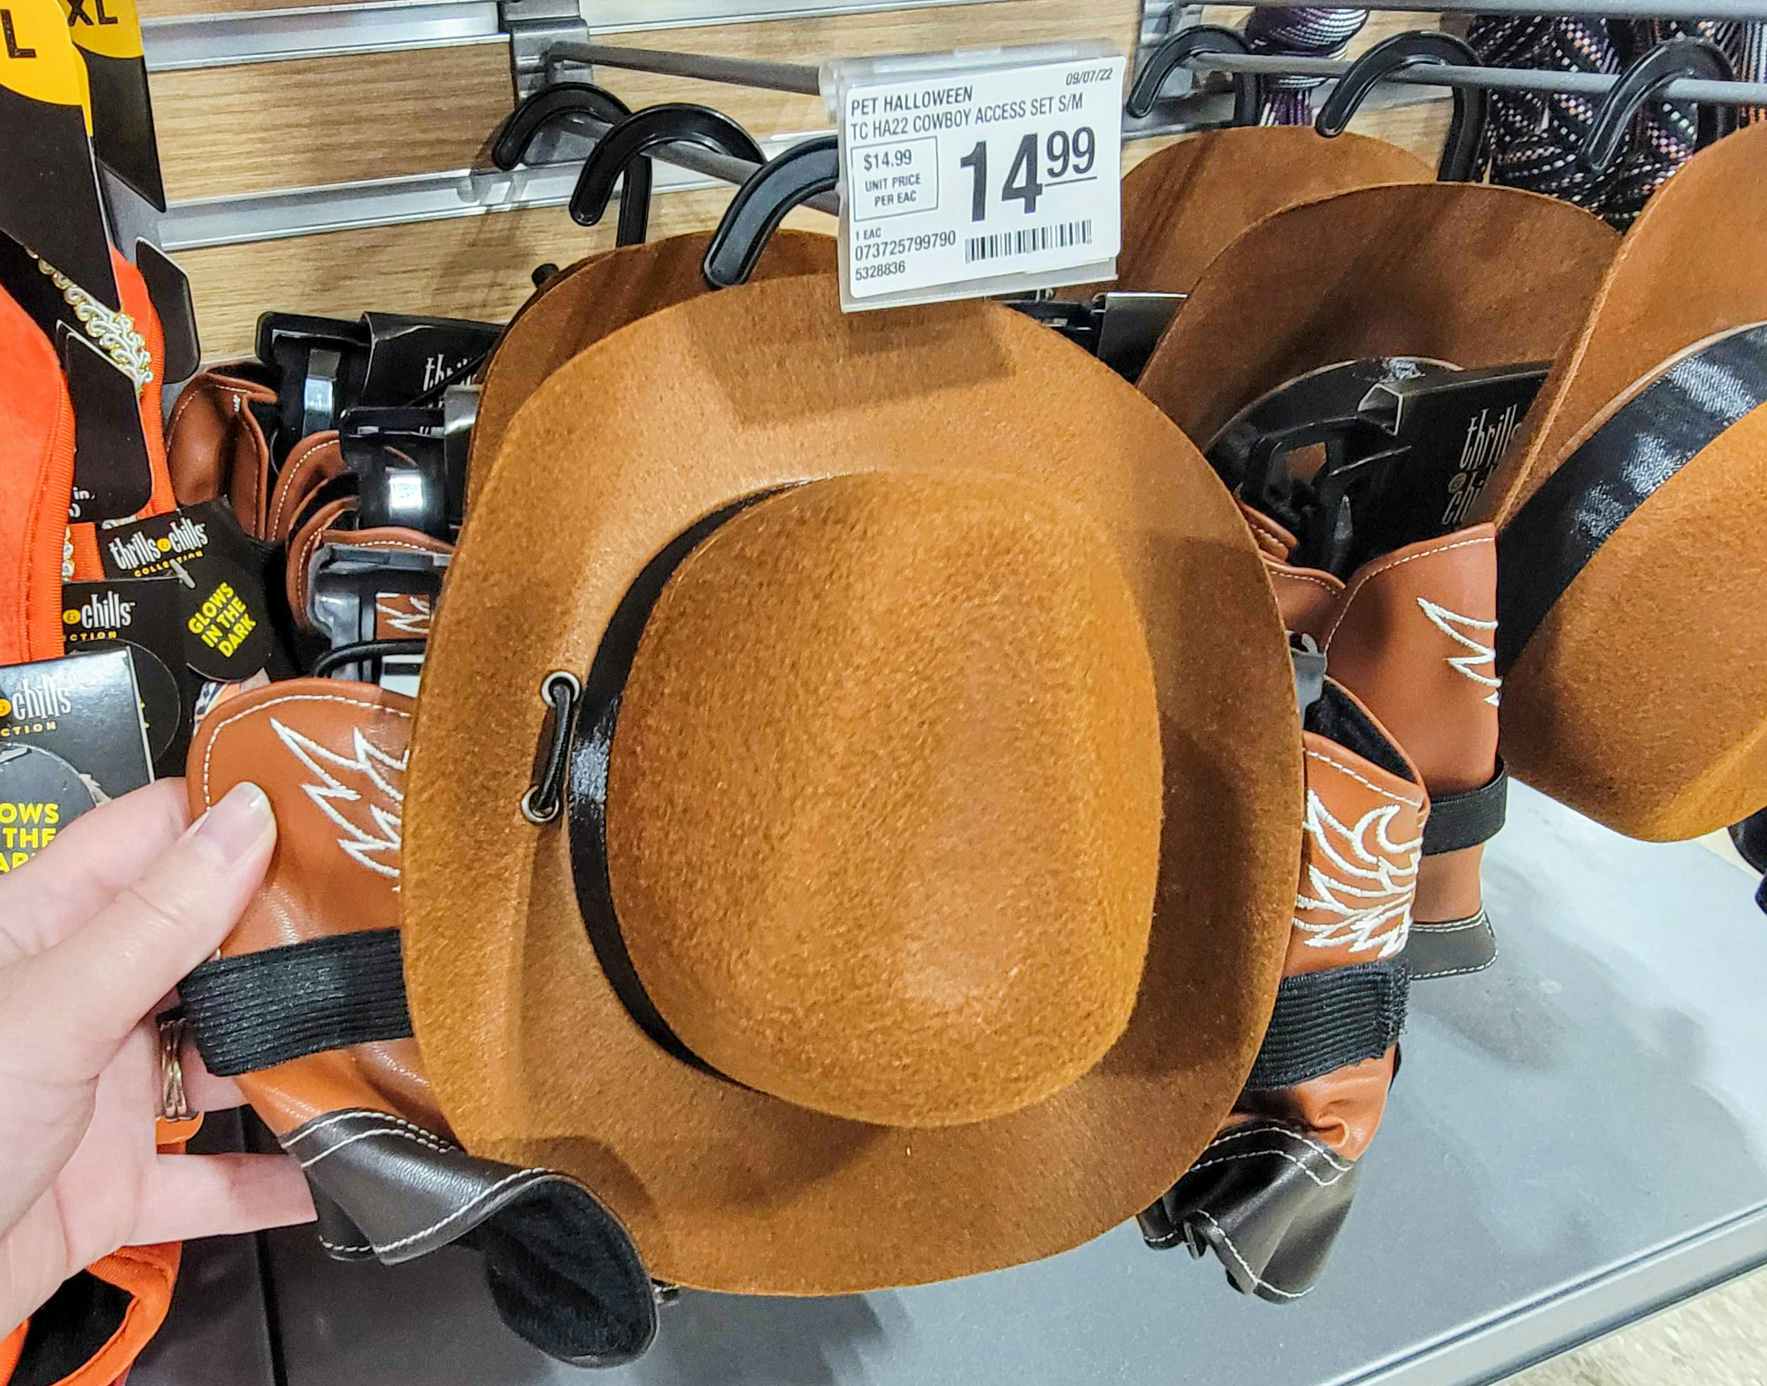 cowboy accessory set for pets including a hat and boots